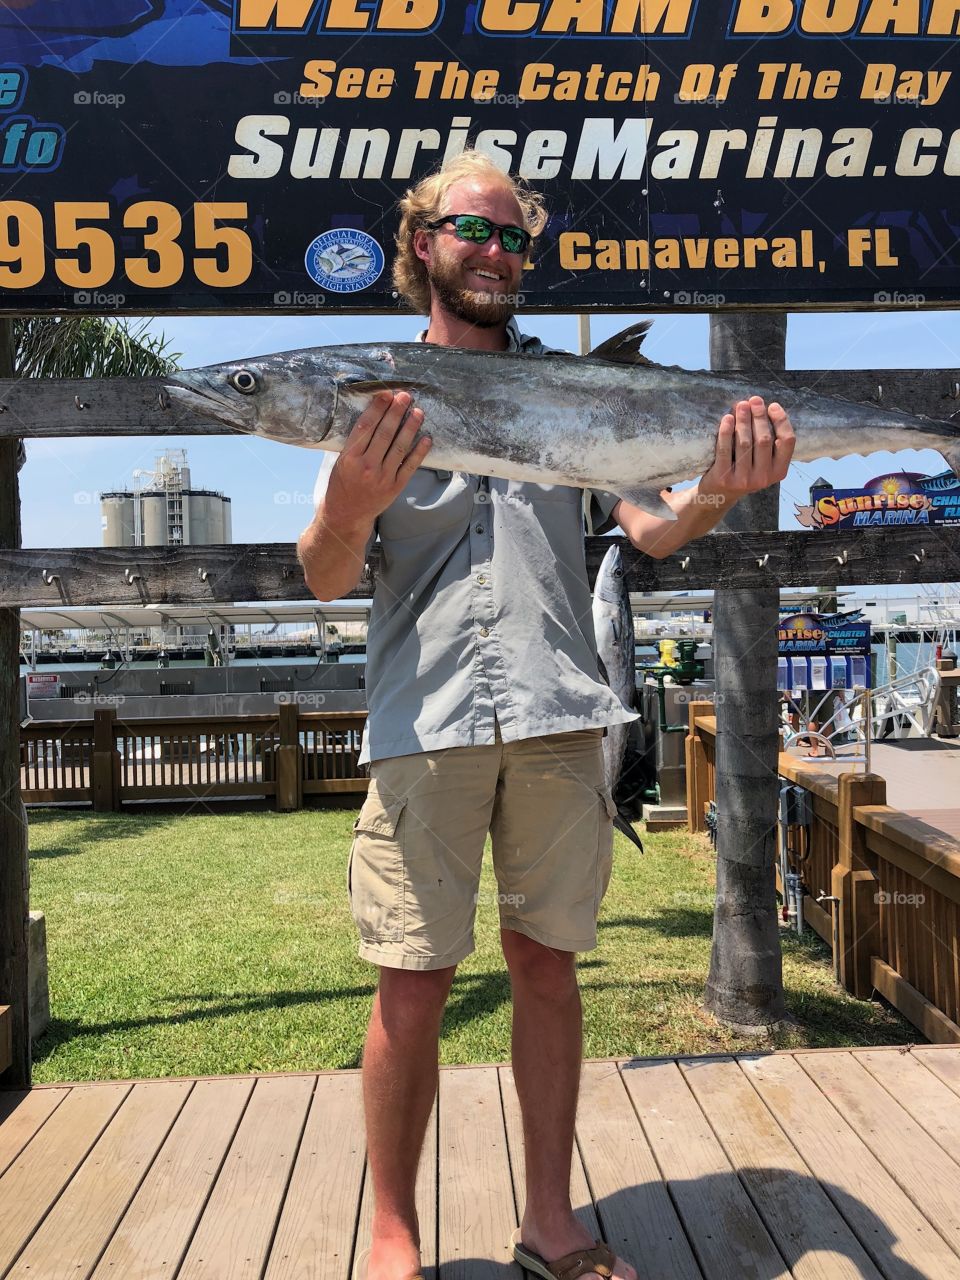 Cocoa beach Florida off shore deep sea fishing for king mackerel! Check out this catch of the day 